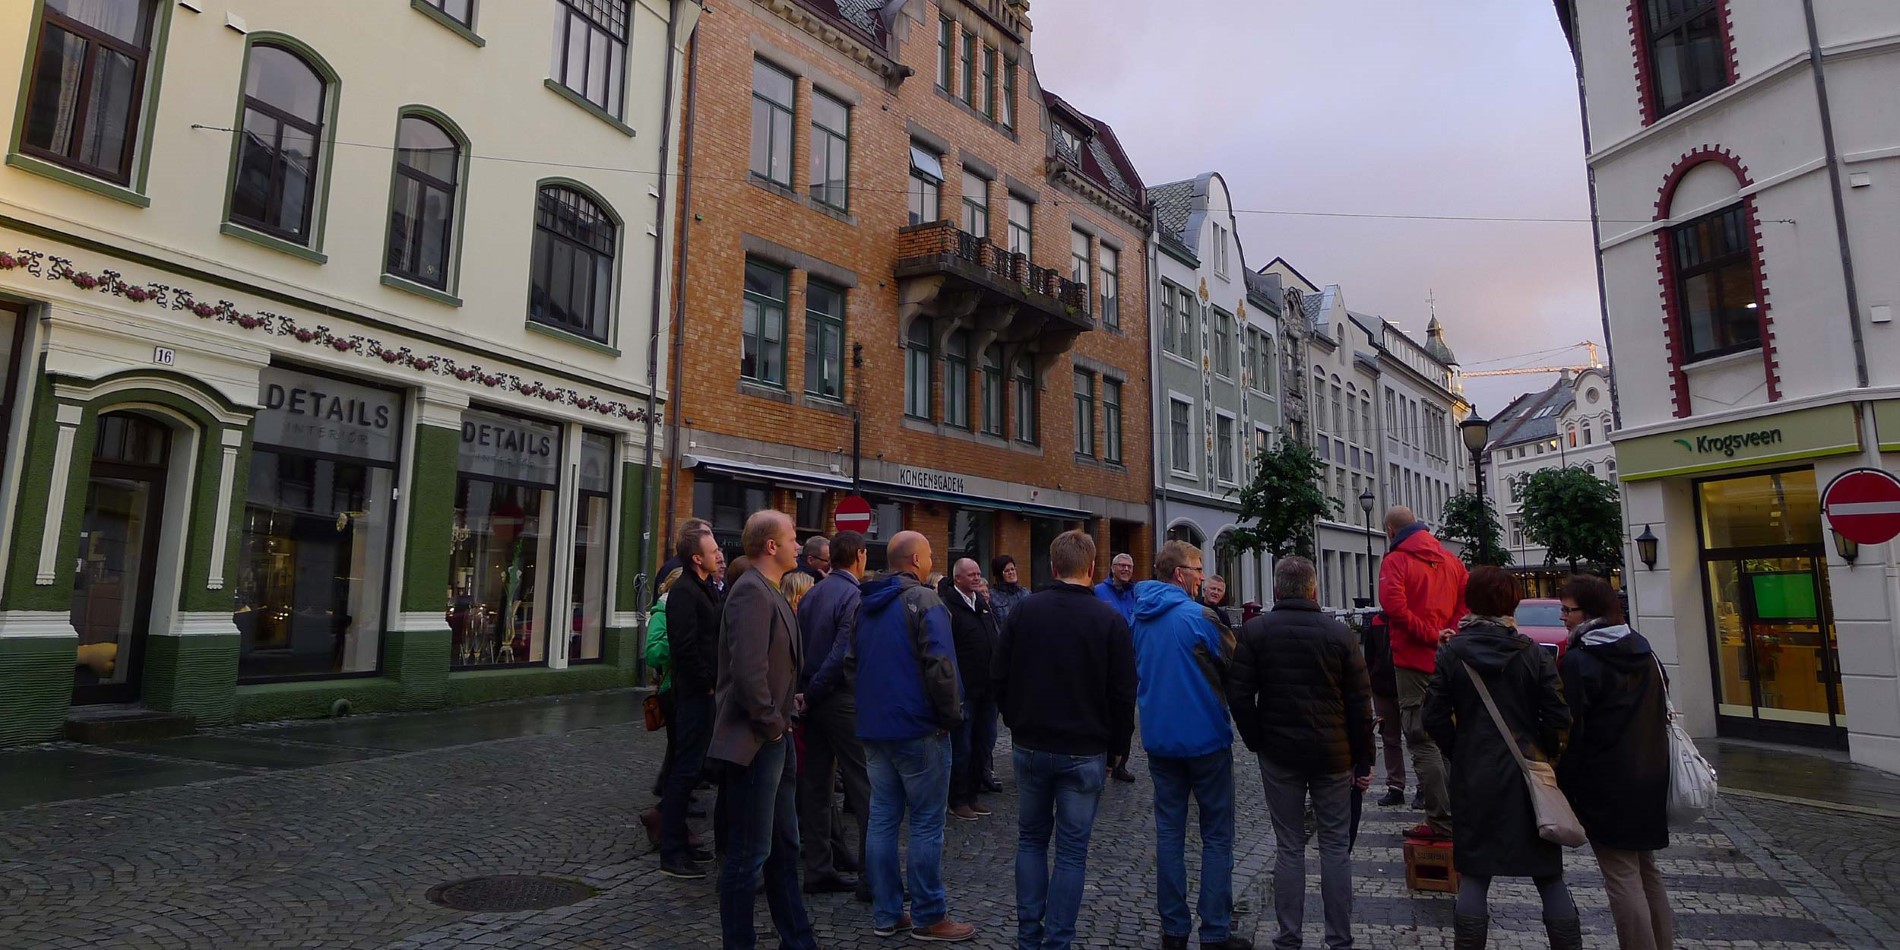 On this 2-hour walk you will see the architecture of Ålesund and hear the story behind it